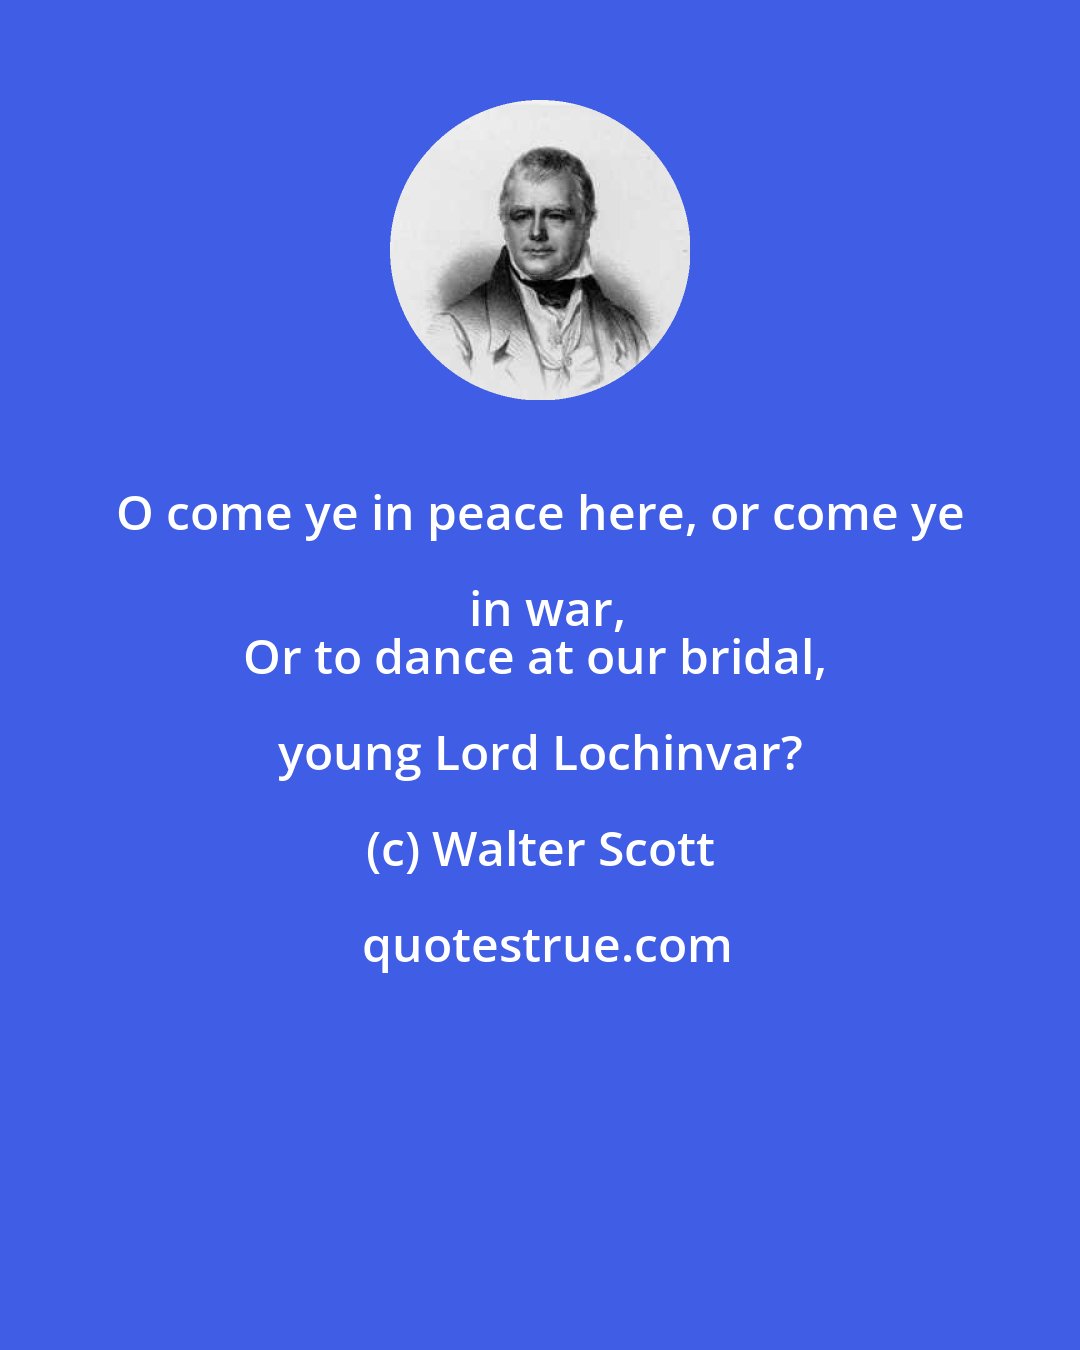 Walter Scott: O come ye in peace here, or come ye in war,
Or to dance at our bridal, young Lord Lochinvar?